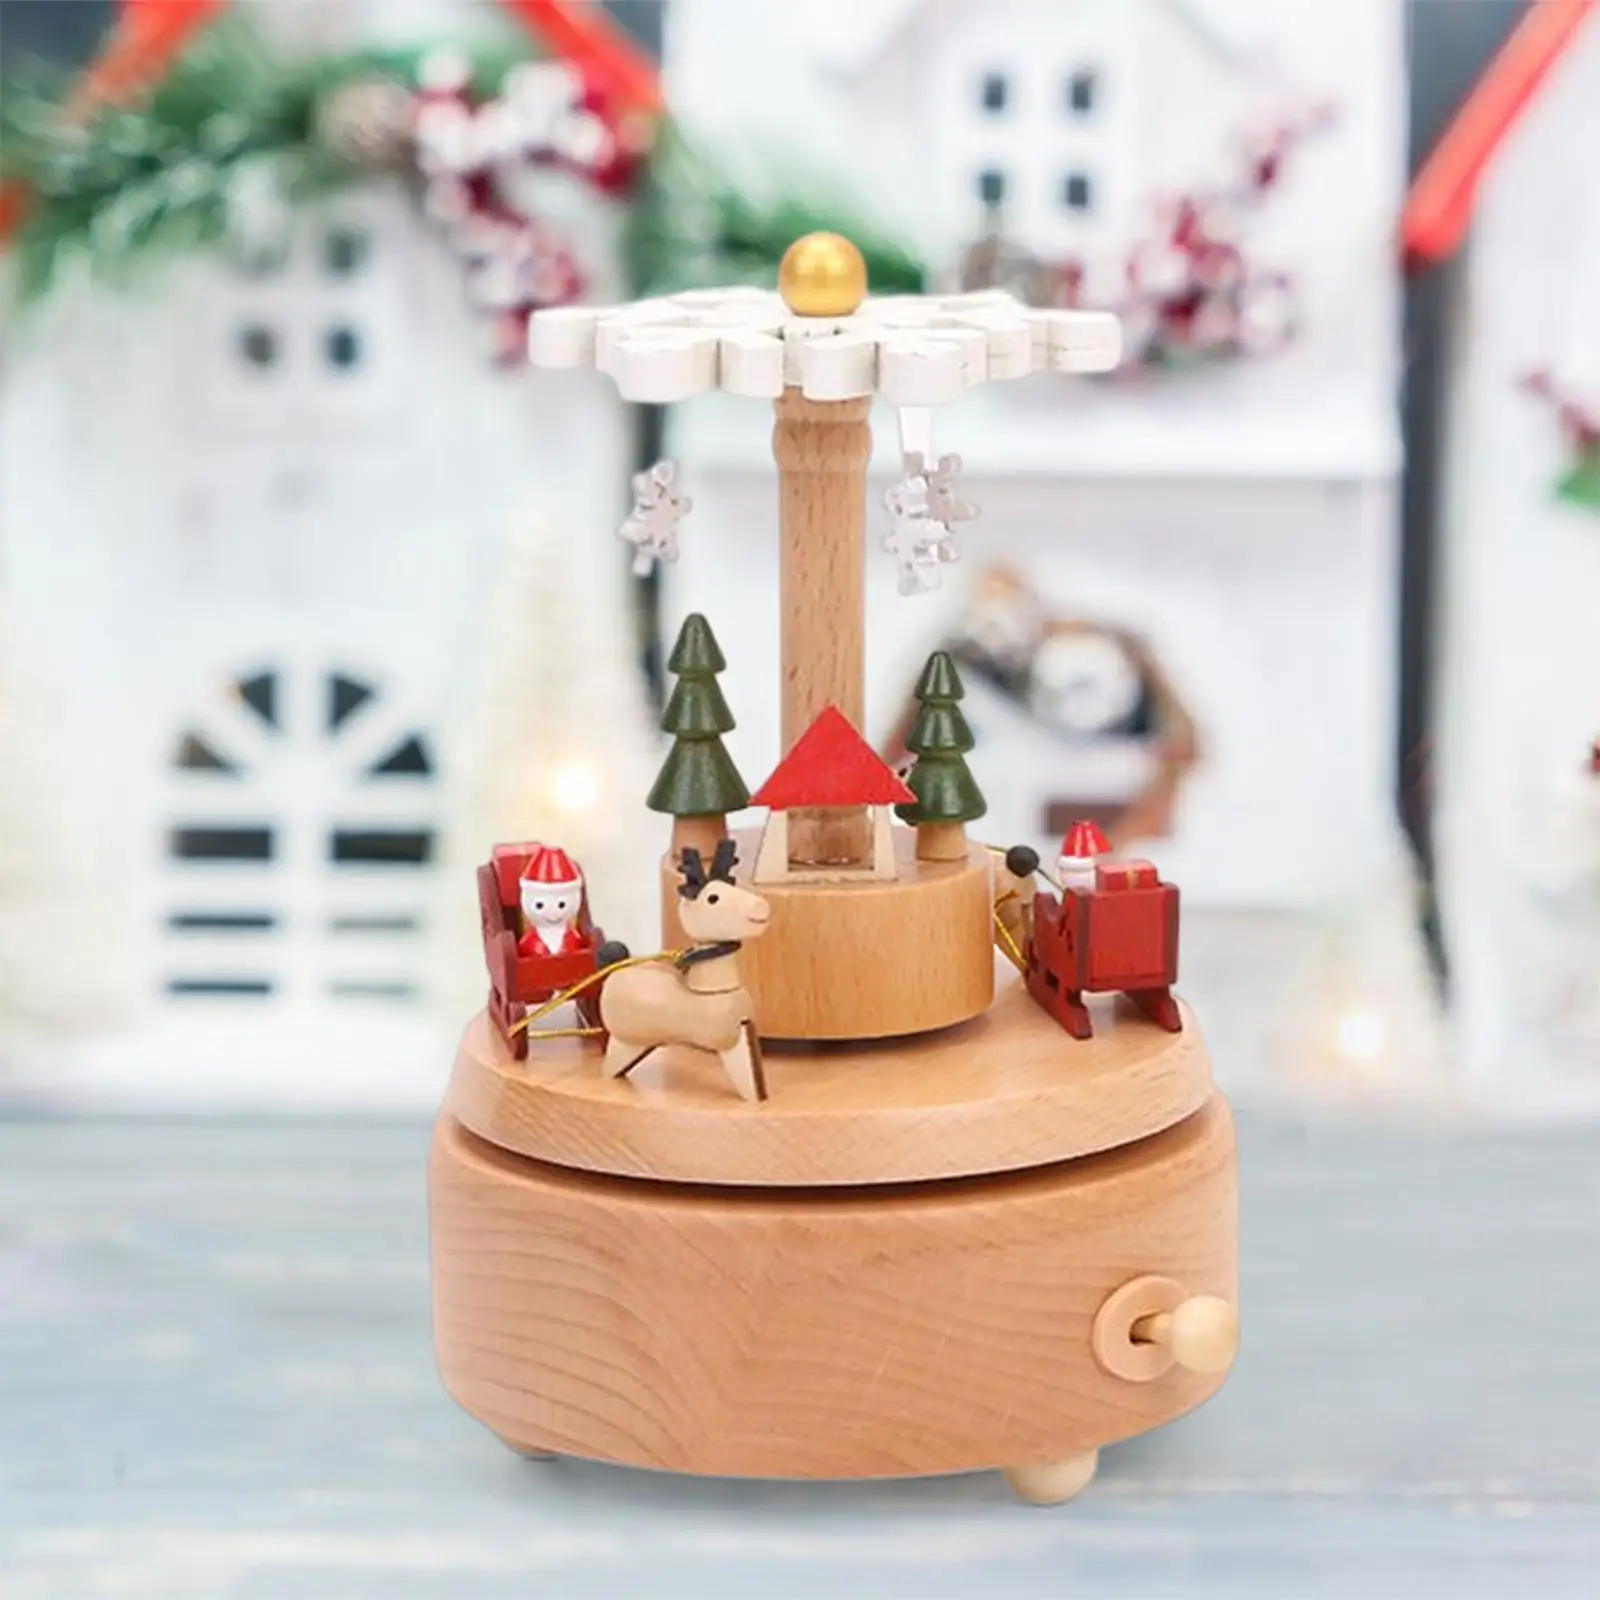 Creative Christmas Music Box Rotating Wood Musical Box Carousel Toy Crafts for Party Indoor Decor Kids Gift Ornament